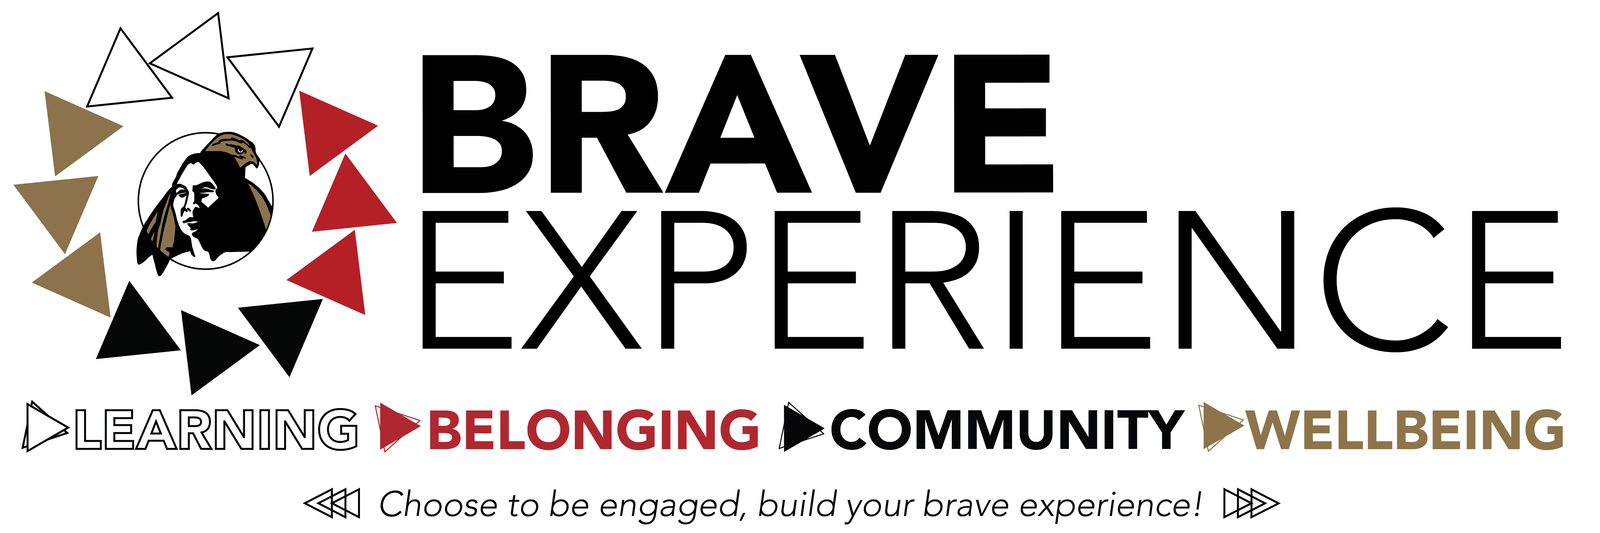 Brave Experience: Learning, Belonging, Community, Wellbeing. 